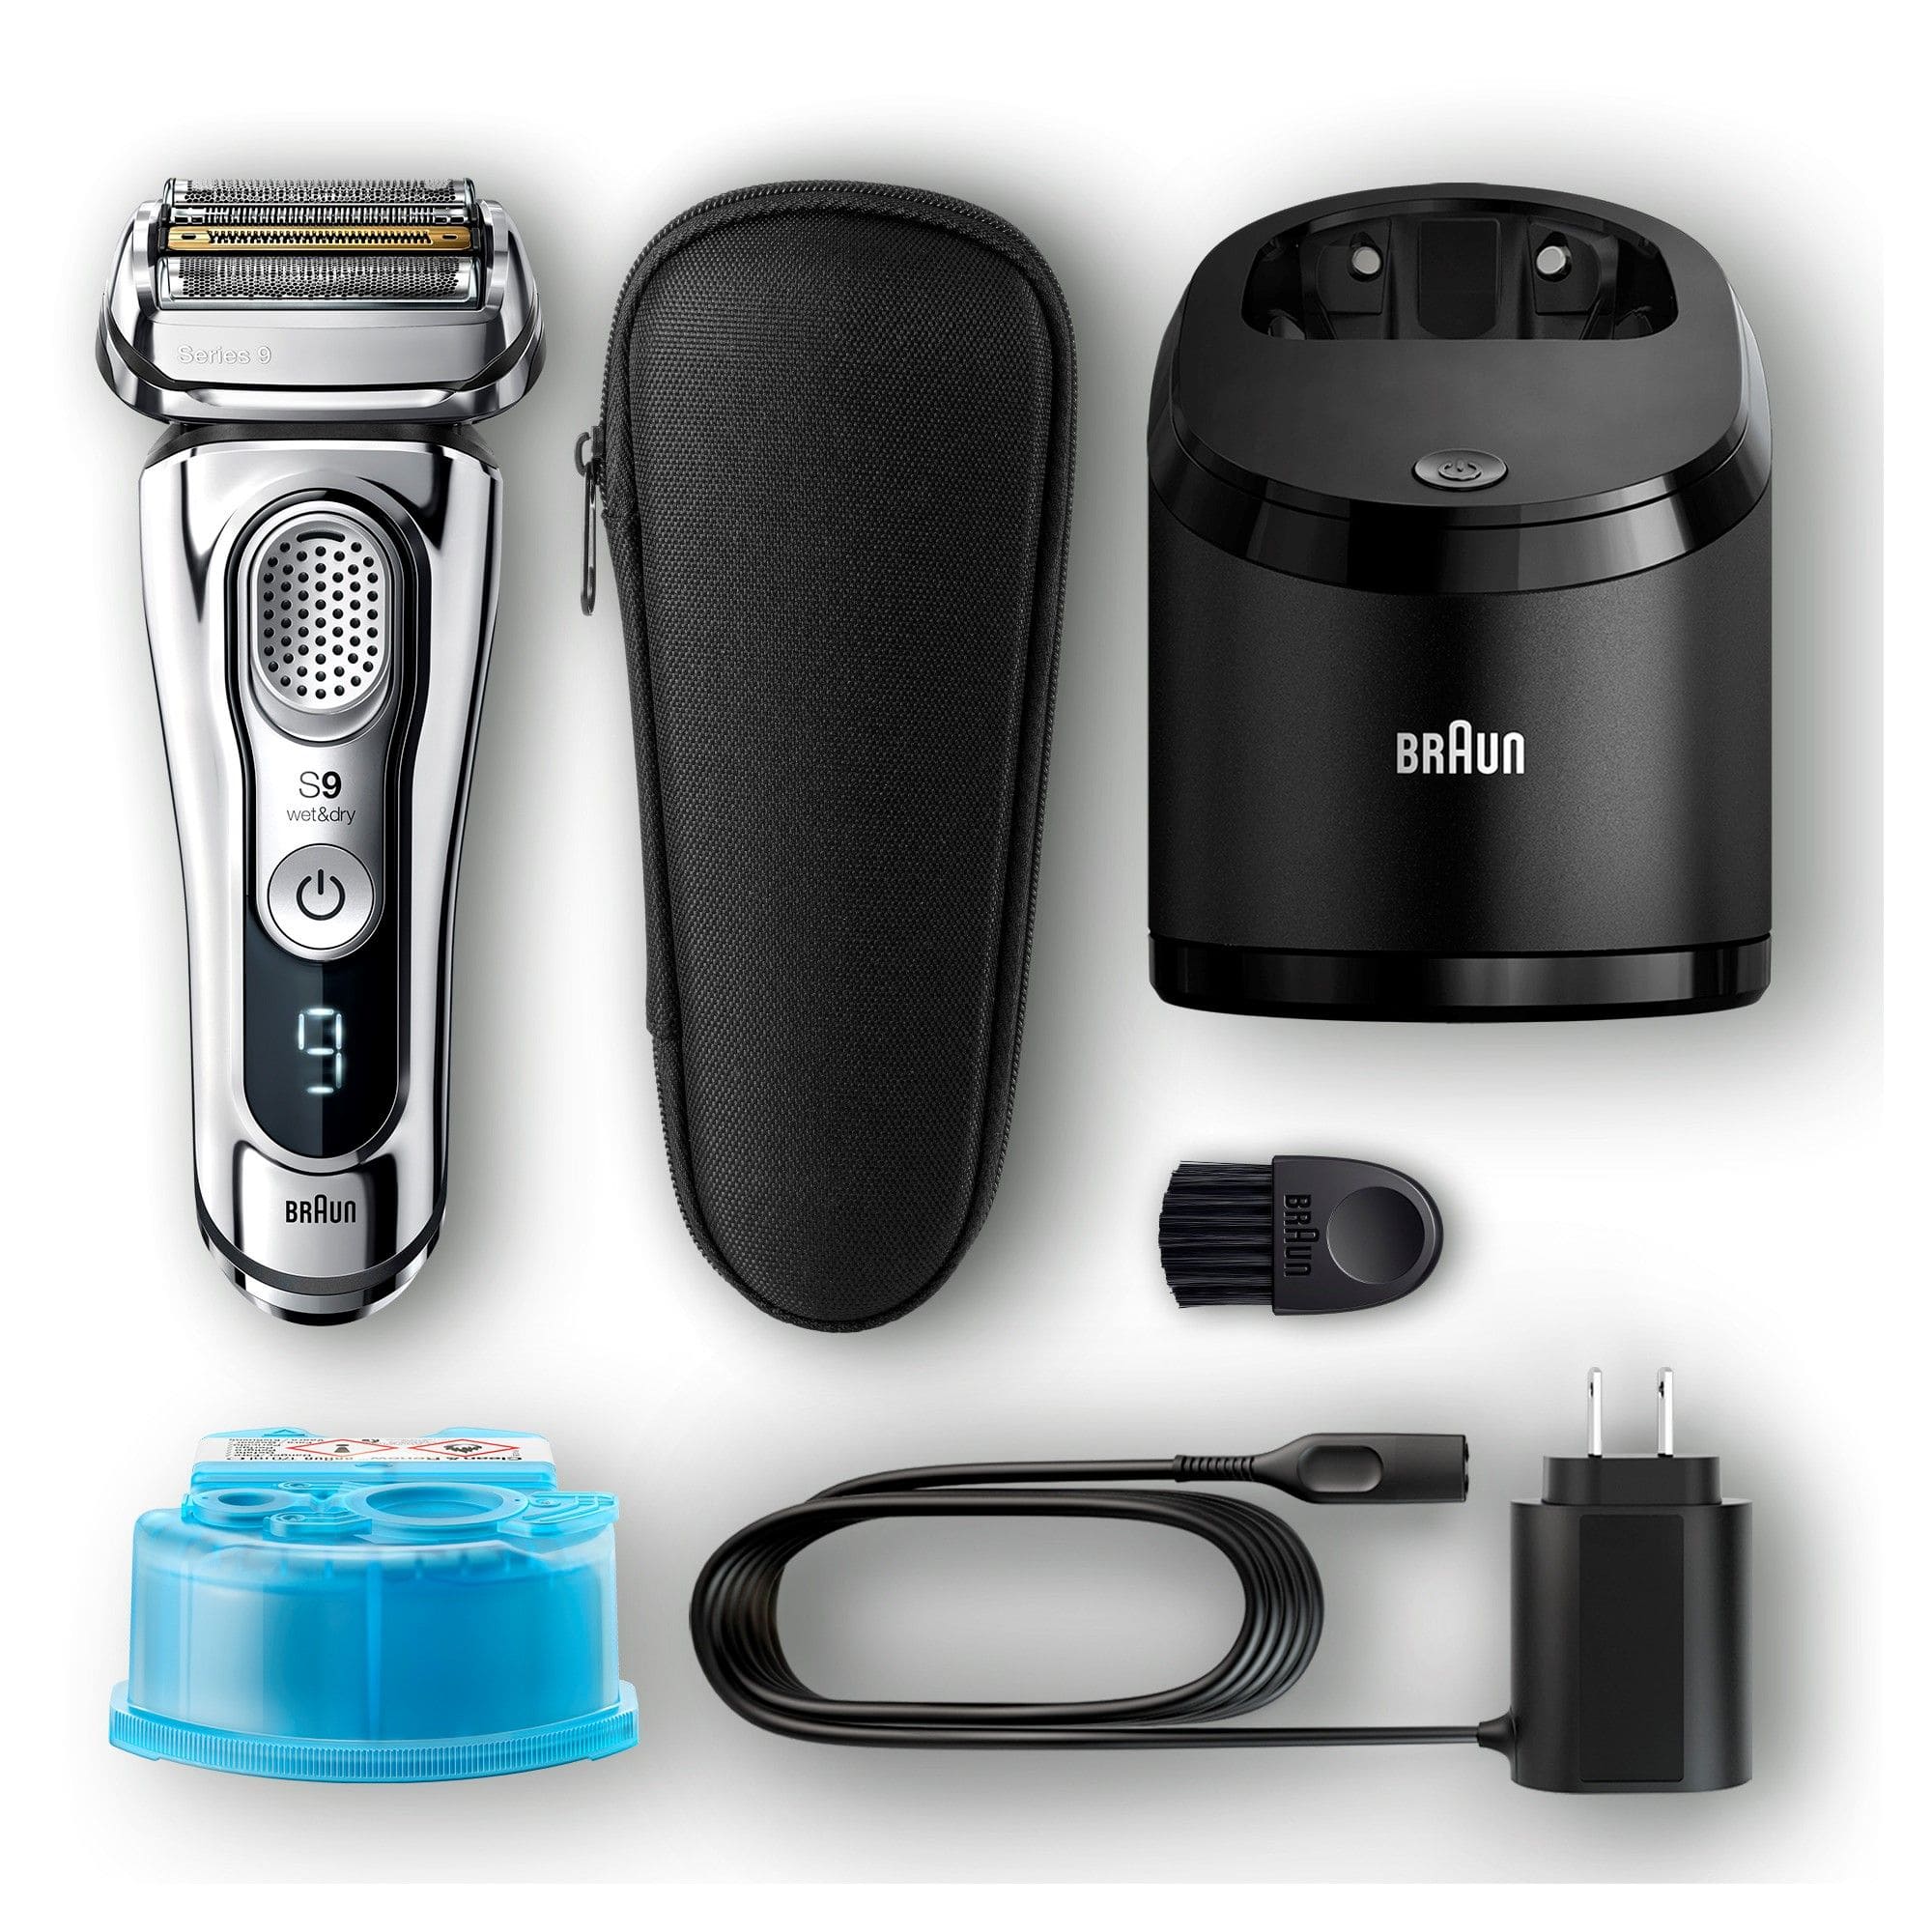 Braun Series 3 Shaver Replacement slide up trimmer and spring